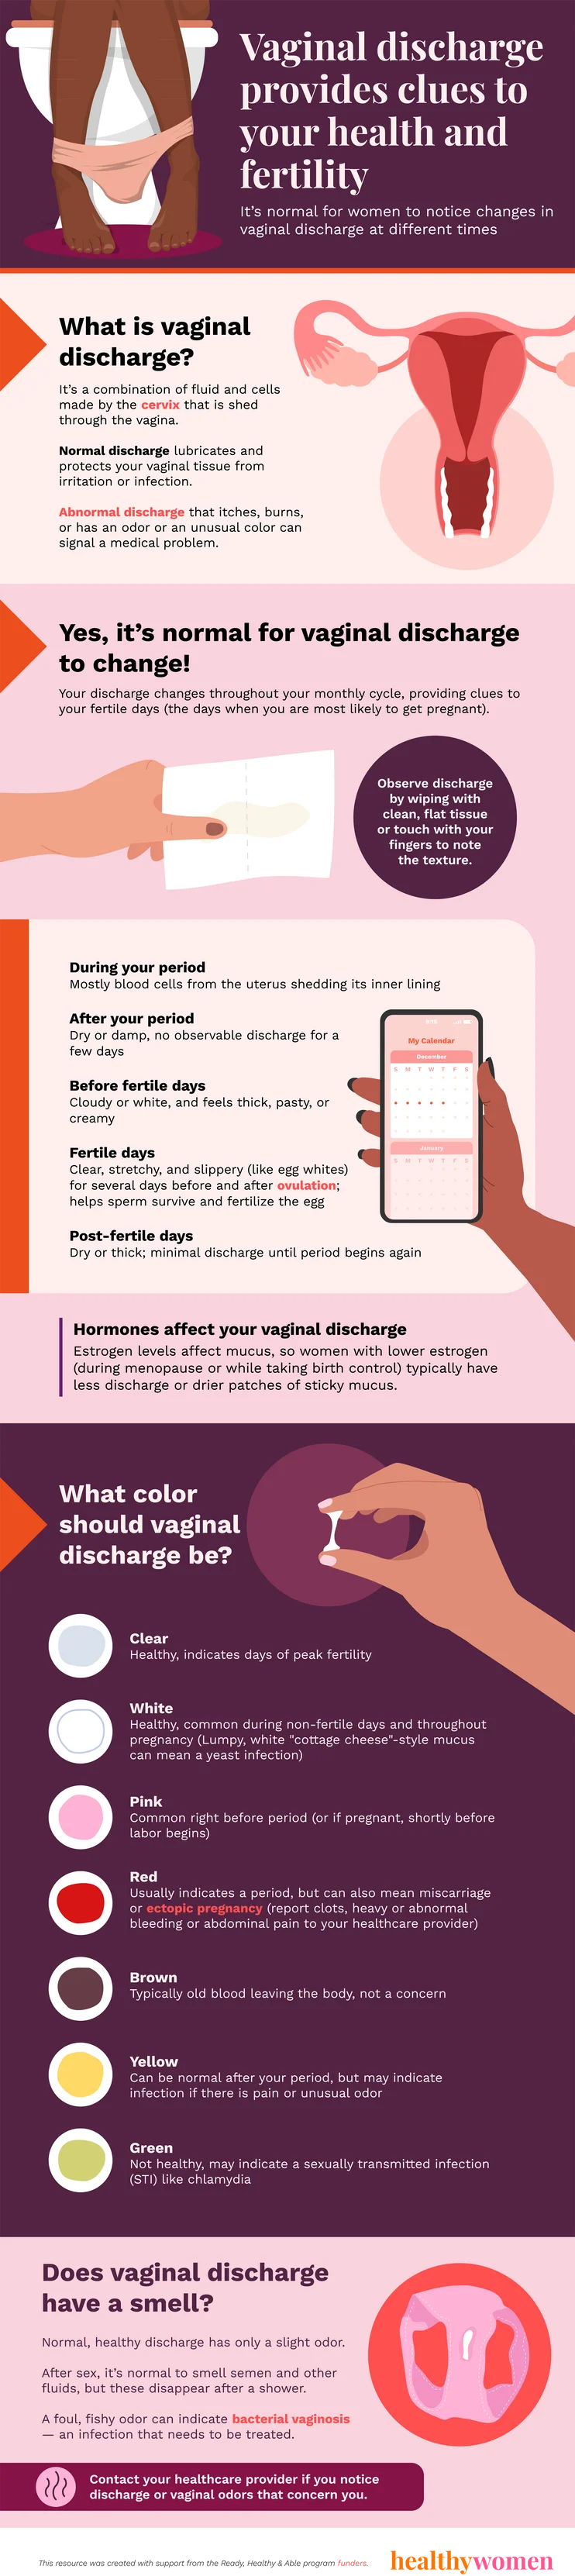 https://www.healthywomen.org/media-library/infographic-vaginal-discharge-provides-clues-to-your-health-and-fertility-click-the-image-to-open-the-pdf.png?id=32363624&width=742&height=3322&quality=85&coordinates=0%2C0%2C0%2C0